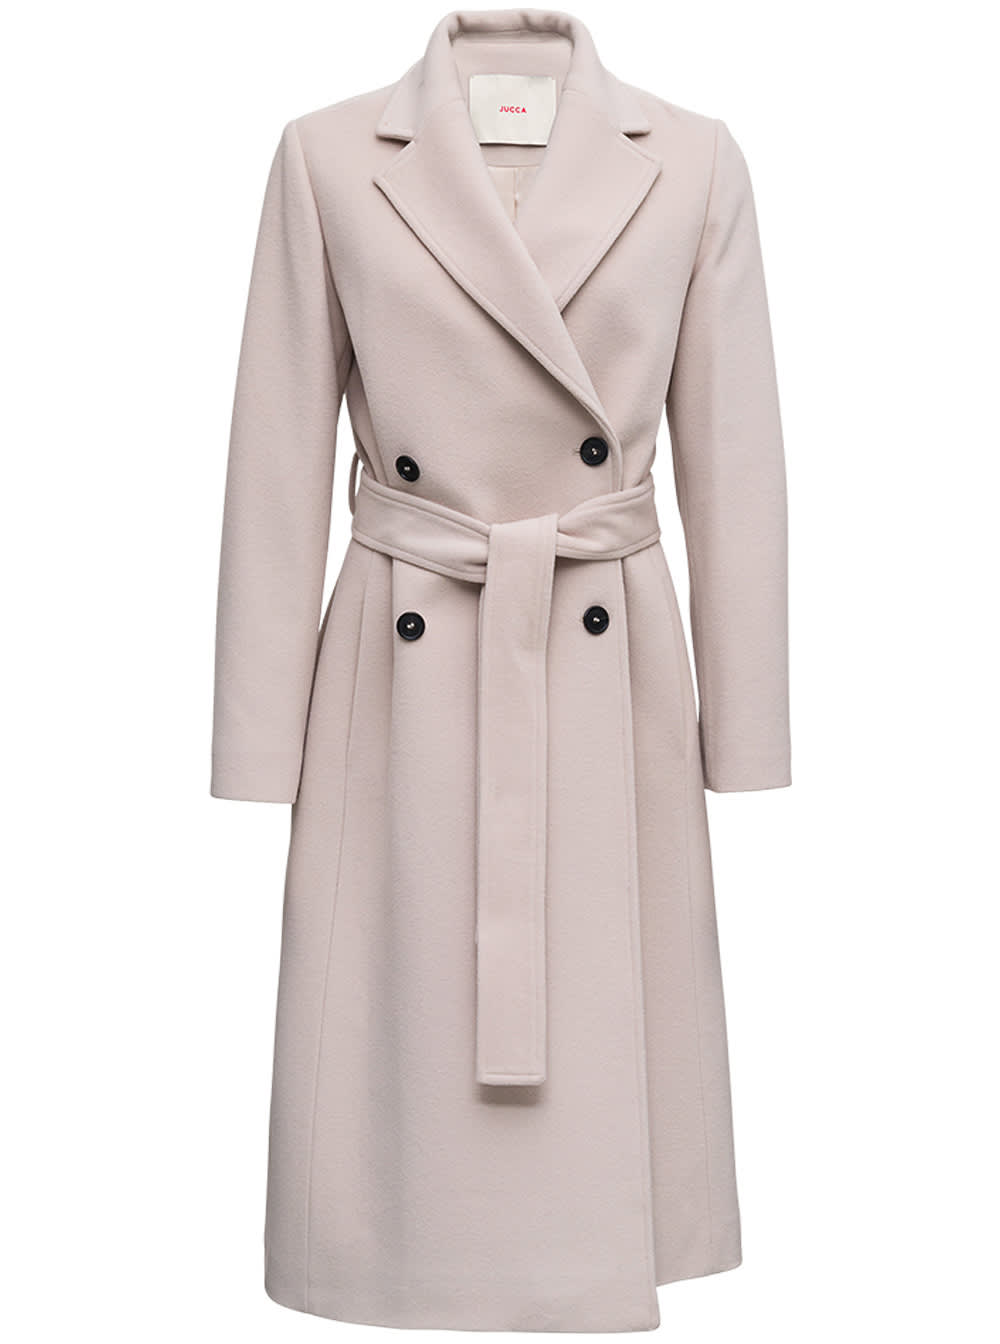 Jucca Long White Wool Blend Coat With Belt